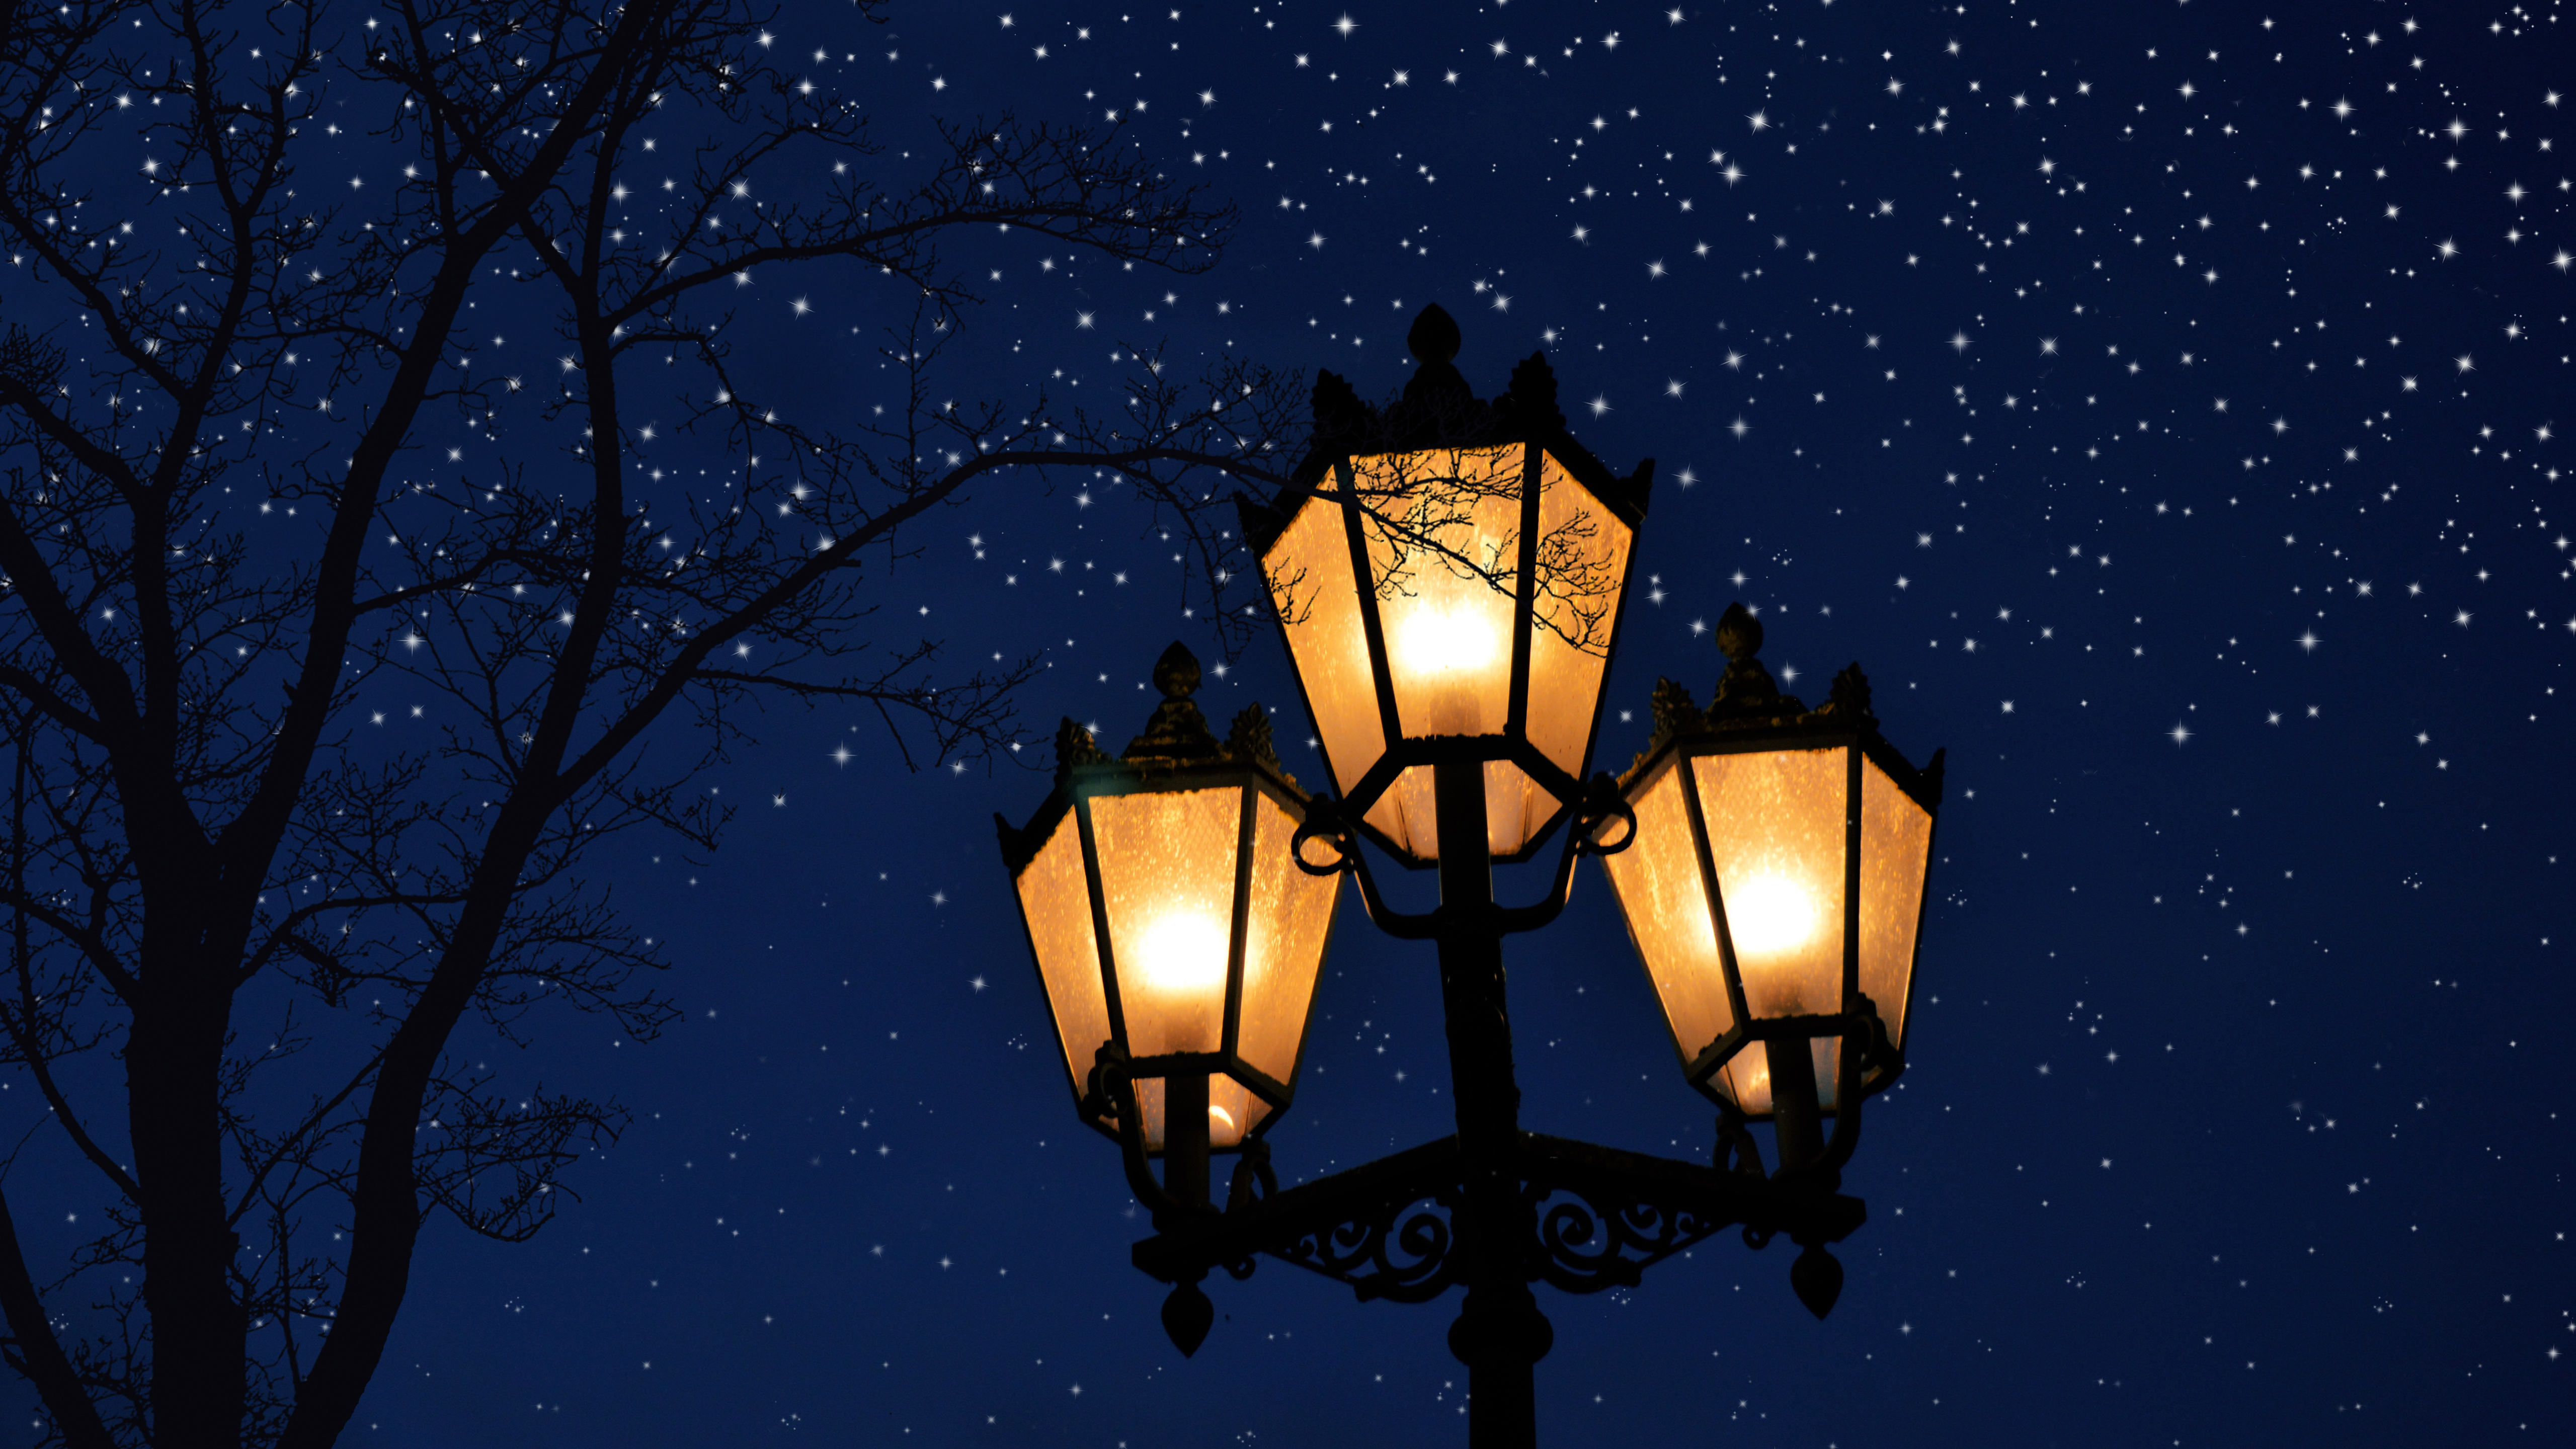 Lamp Post And Tree Without Leaves In Wallpaper Of Blue Sky And Stars K K HD Nature